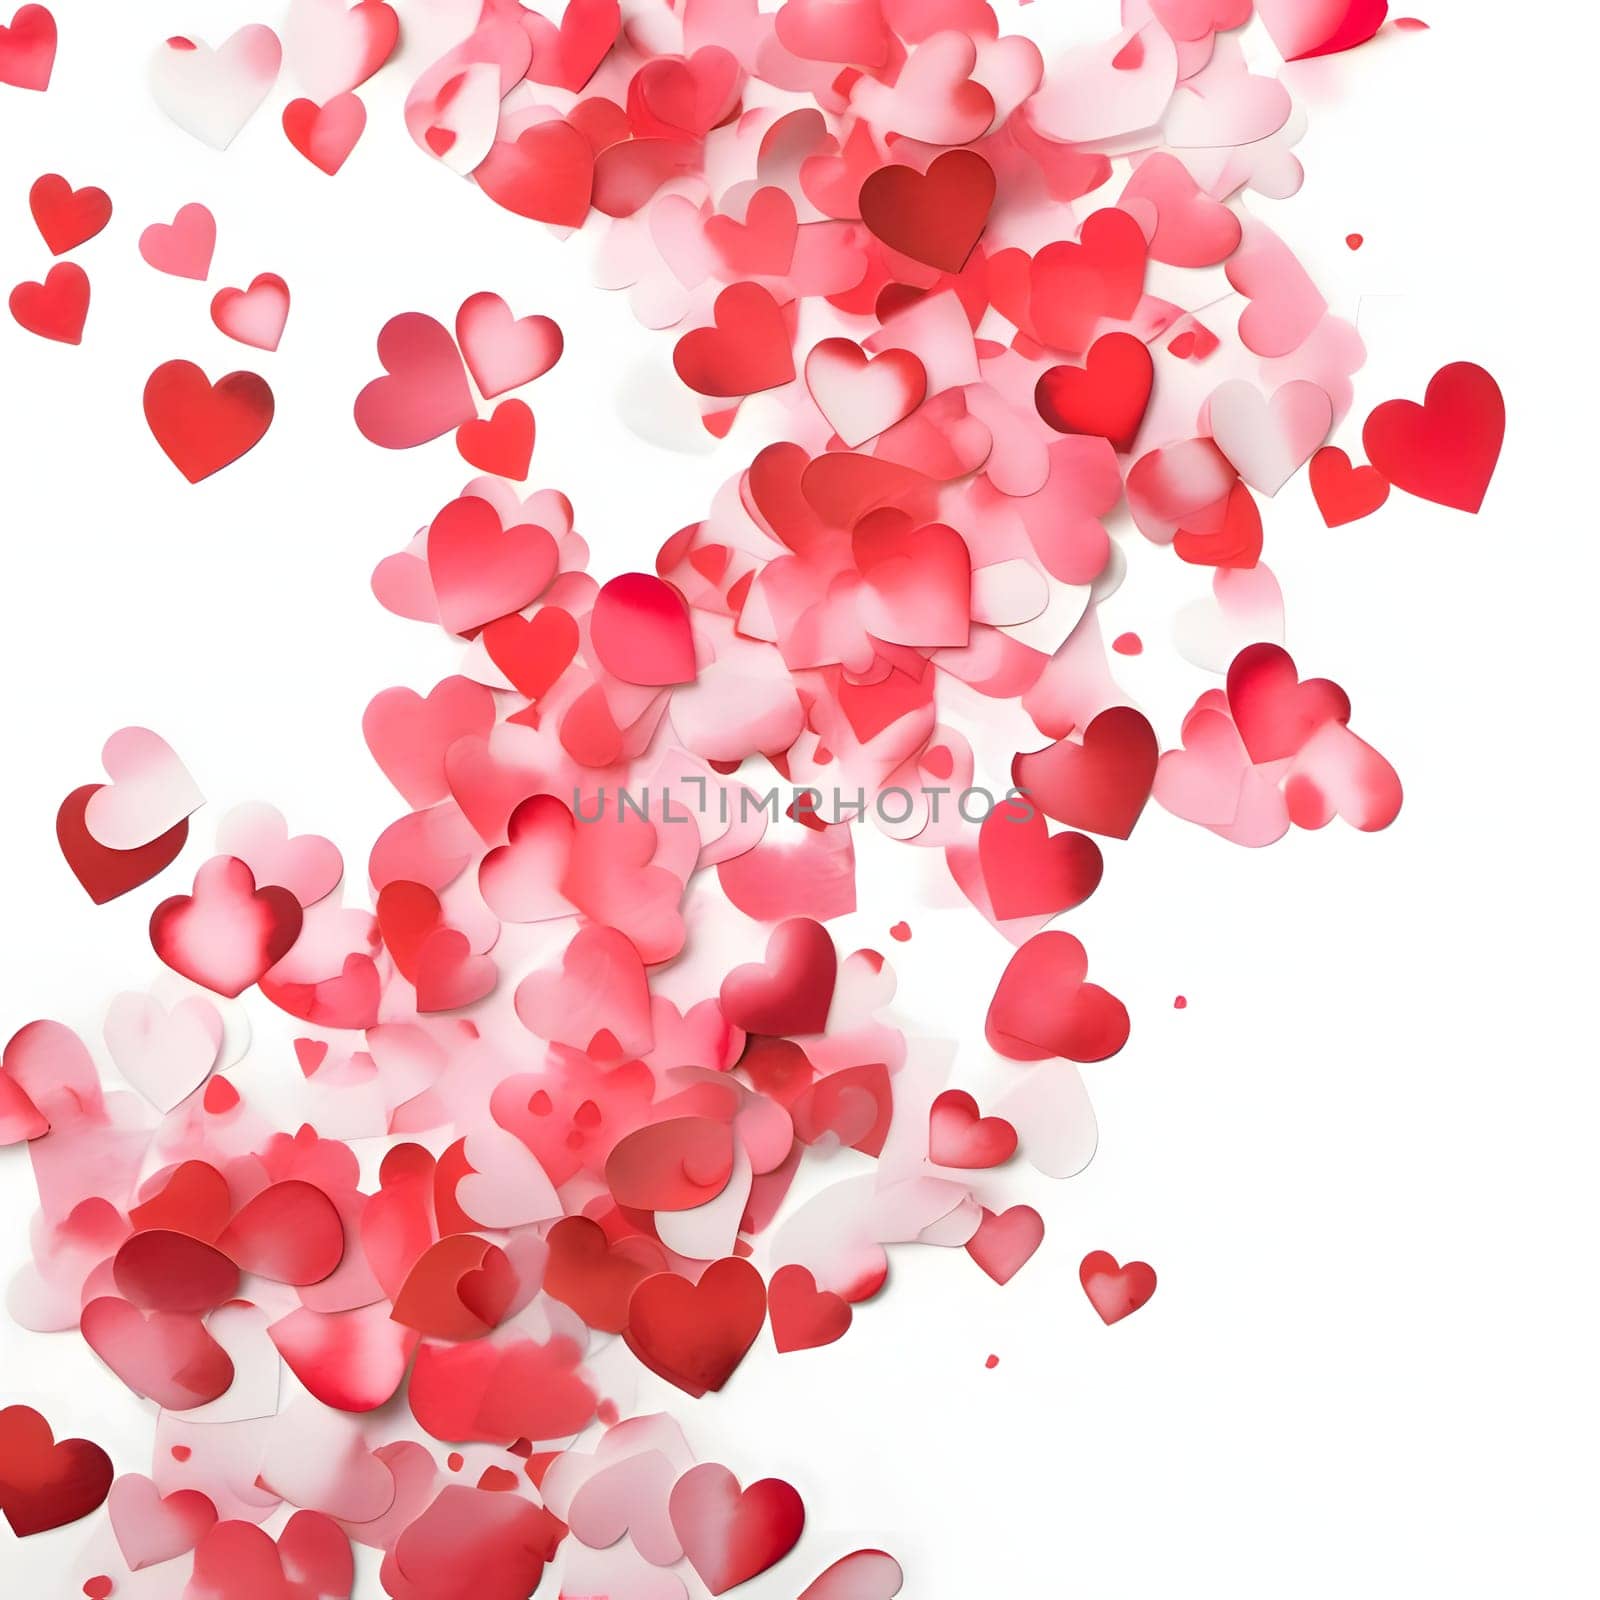 Scattered red white pink hearts on a white background. Heart as a symbol of affection and love. The time of falling in love and love.